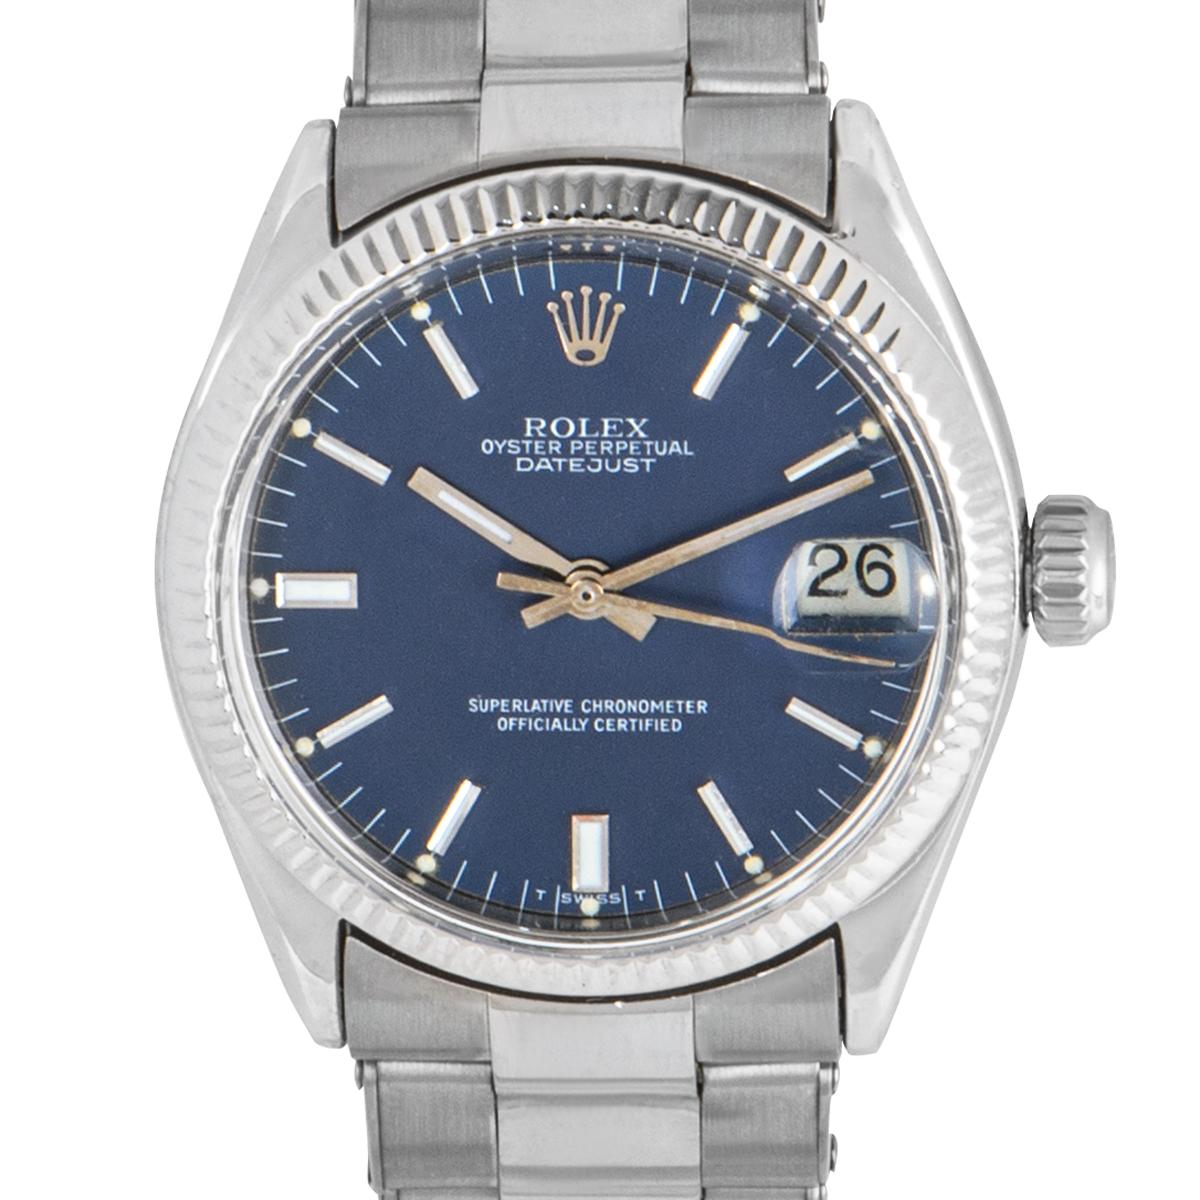 An 18k White Gold Oyster Perpetual 30mm Datejust Vintage Mid-Size Wristwatch, blue dial with applied index batons, date at 3 0'clock, an 18k white gold fixed fluted bezel, a brushed and polished 18k white gold riveted oyster bracelet with a brushed